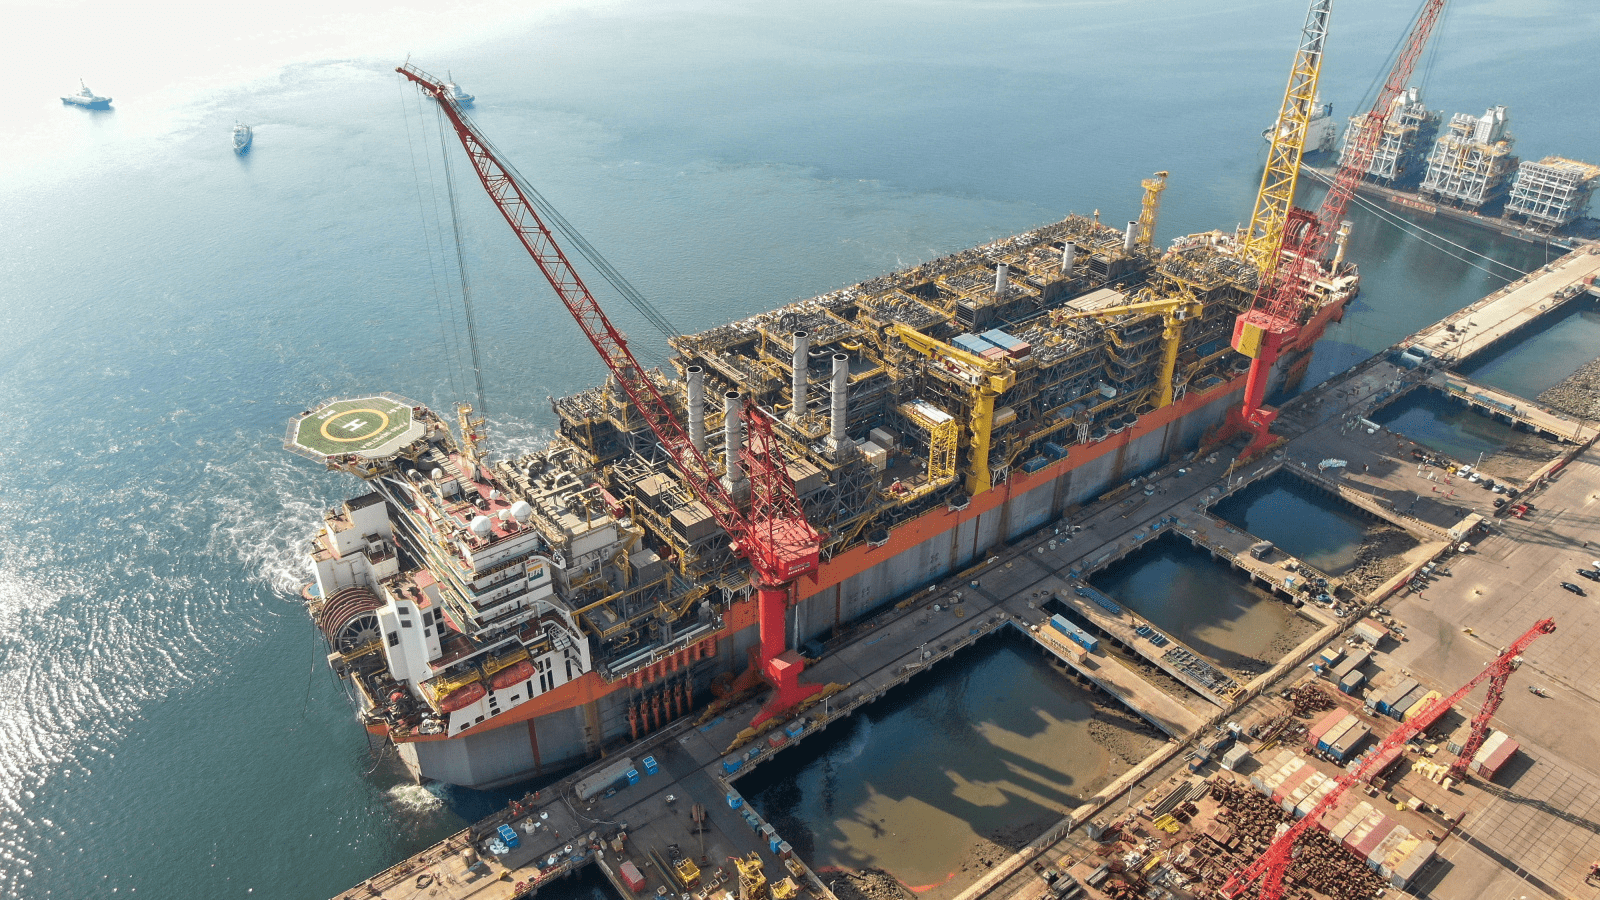 https://oilnow.gy/featured/modec-sbm-offshore-competing-for-suriname-fpso-award/